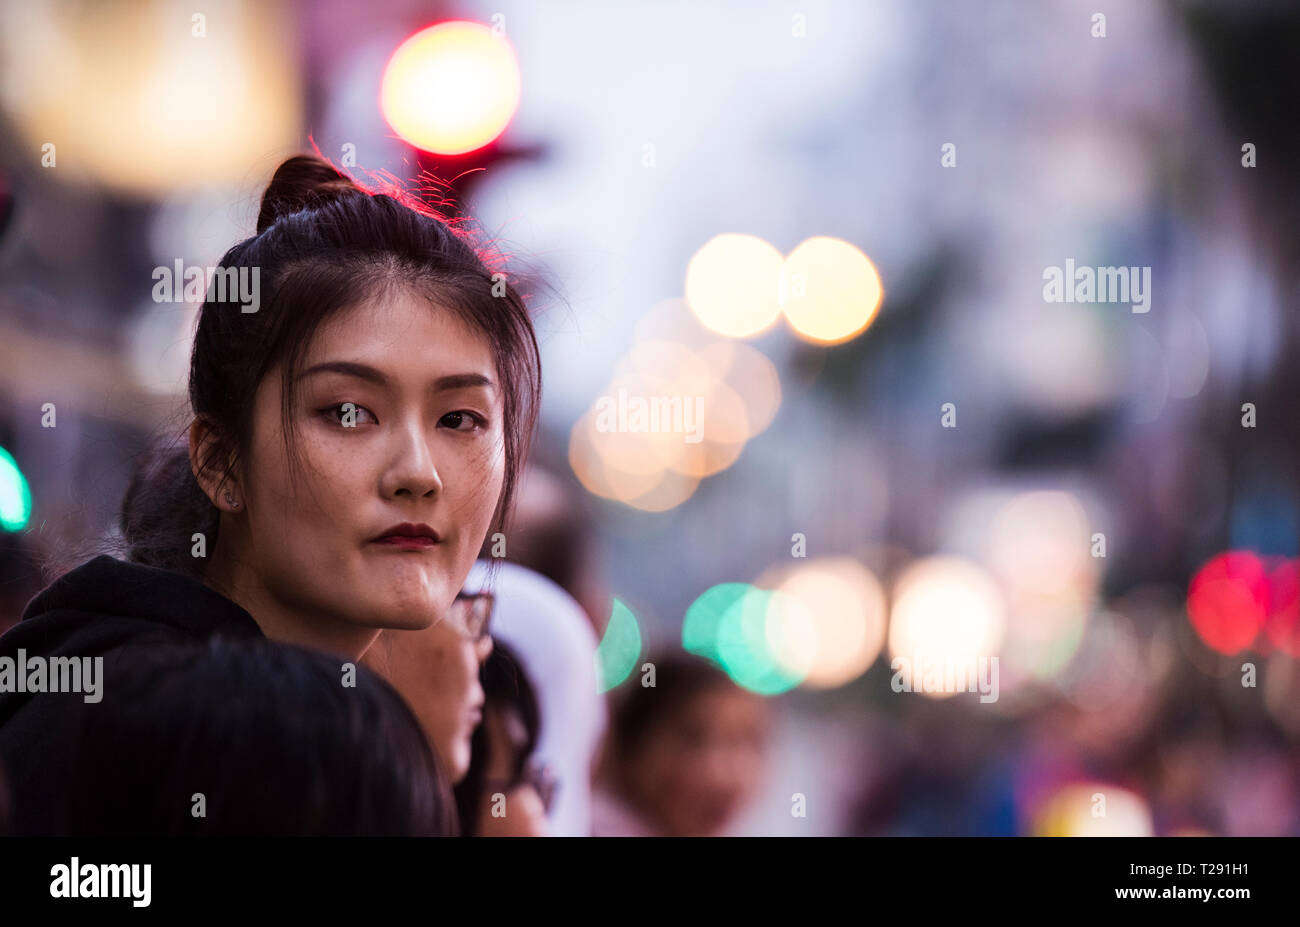 Portrait of woman looking directly at camera, during Chinese New Year celebrations, Kowloon, Hong Kong Stock Photo